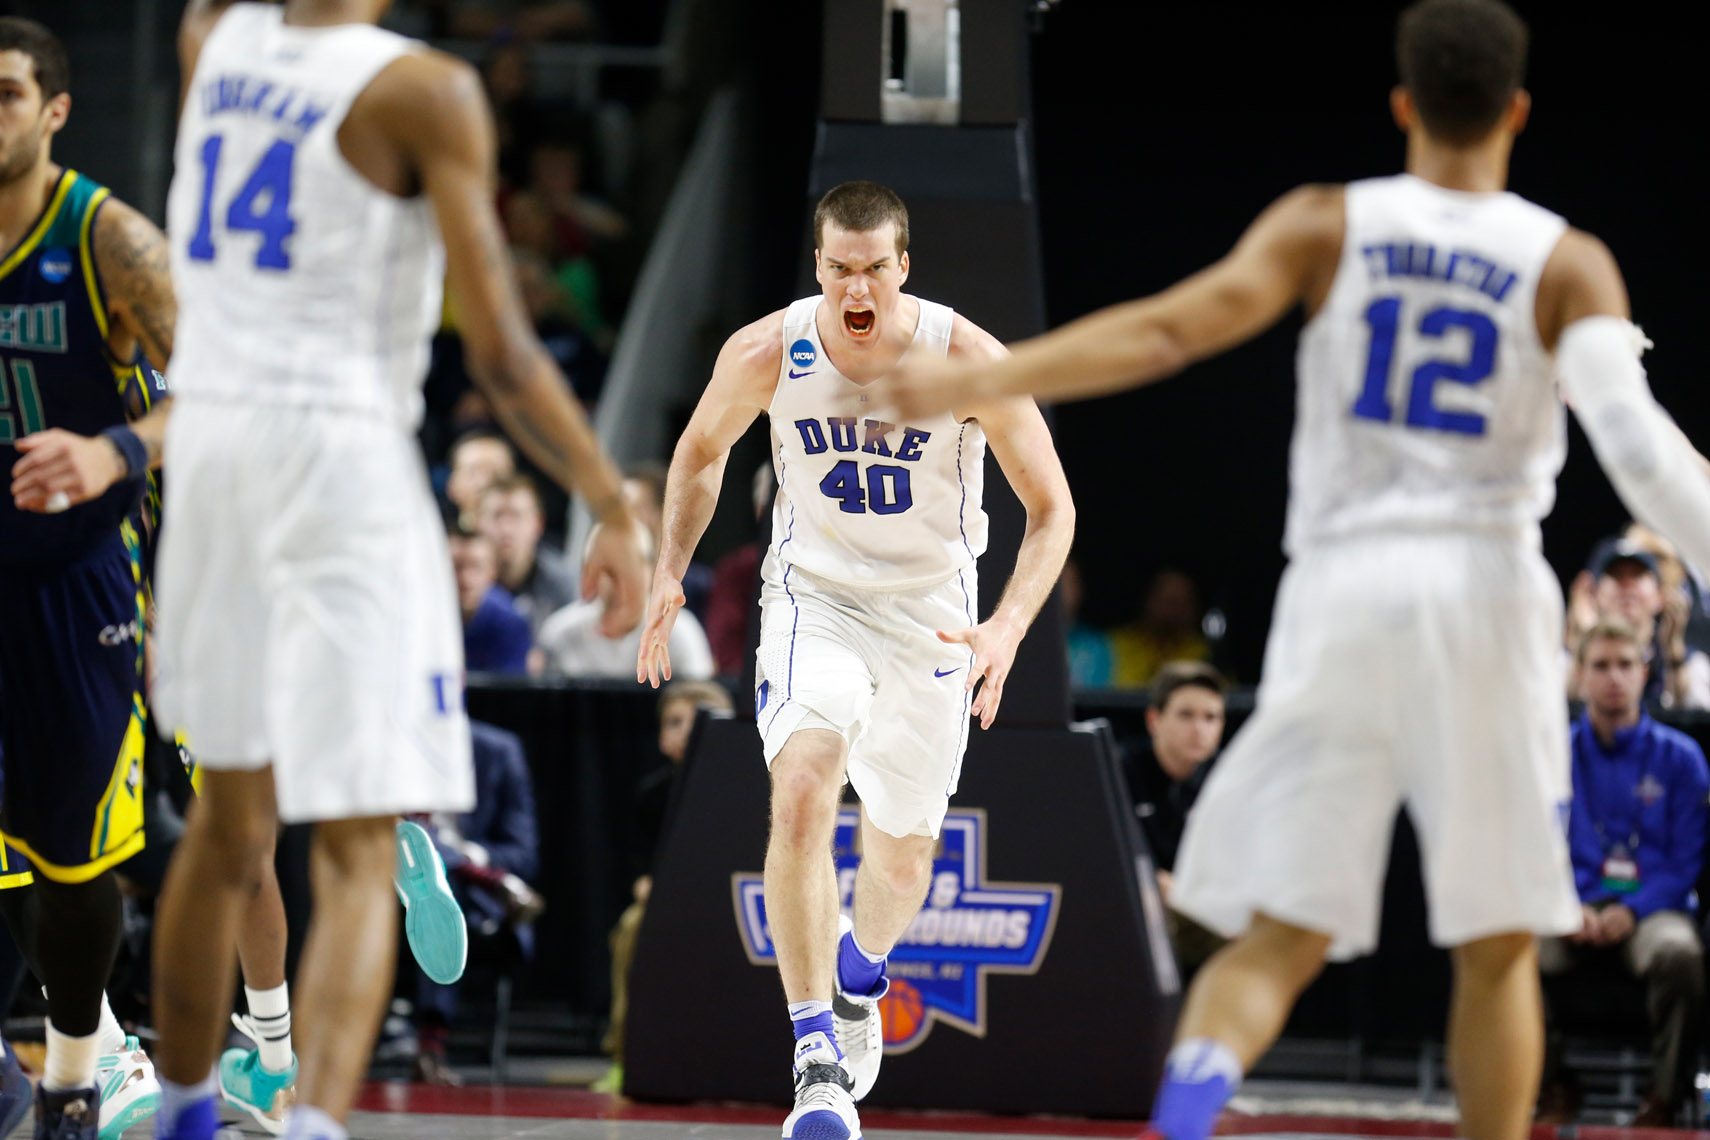 Duke center Marshall Plumlee reacts after scoring in an NCAA  tournament game.